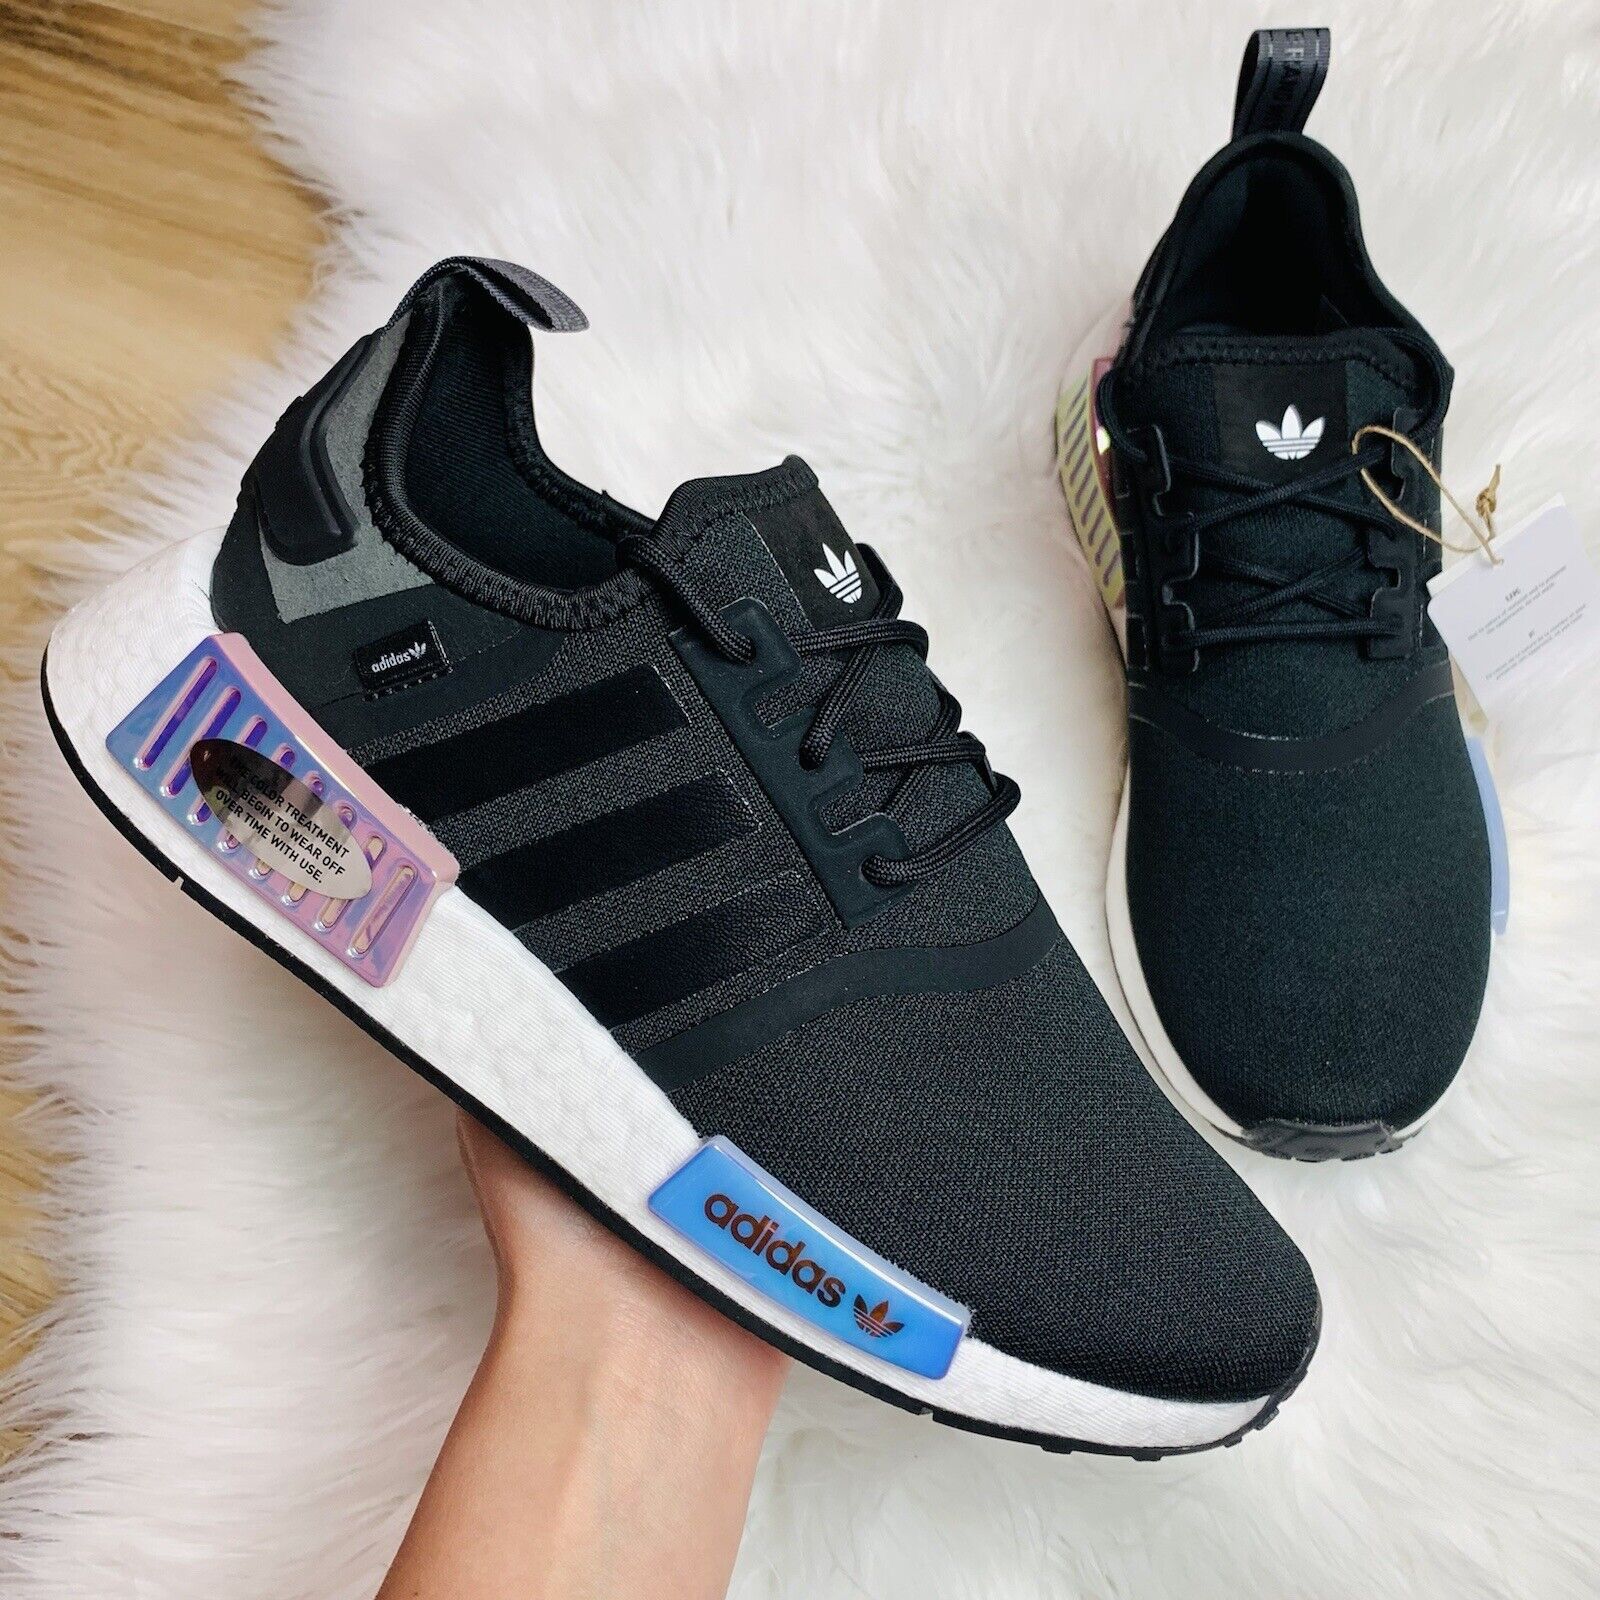 NEW Adidas Women's NMD Running Shoes - Parley Black Magic Mauve - Size 7.5 for Sale in Covina, CA - OfferUp